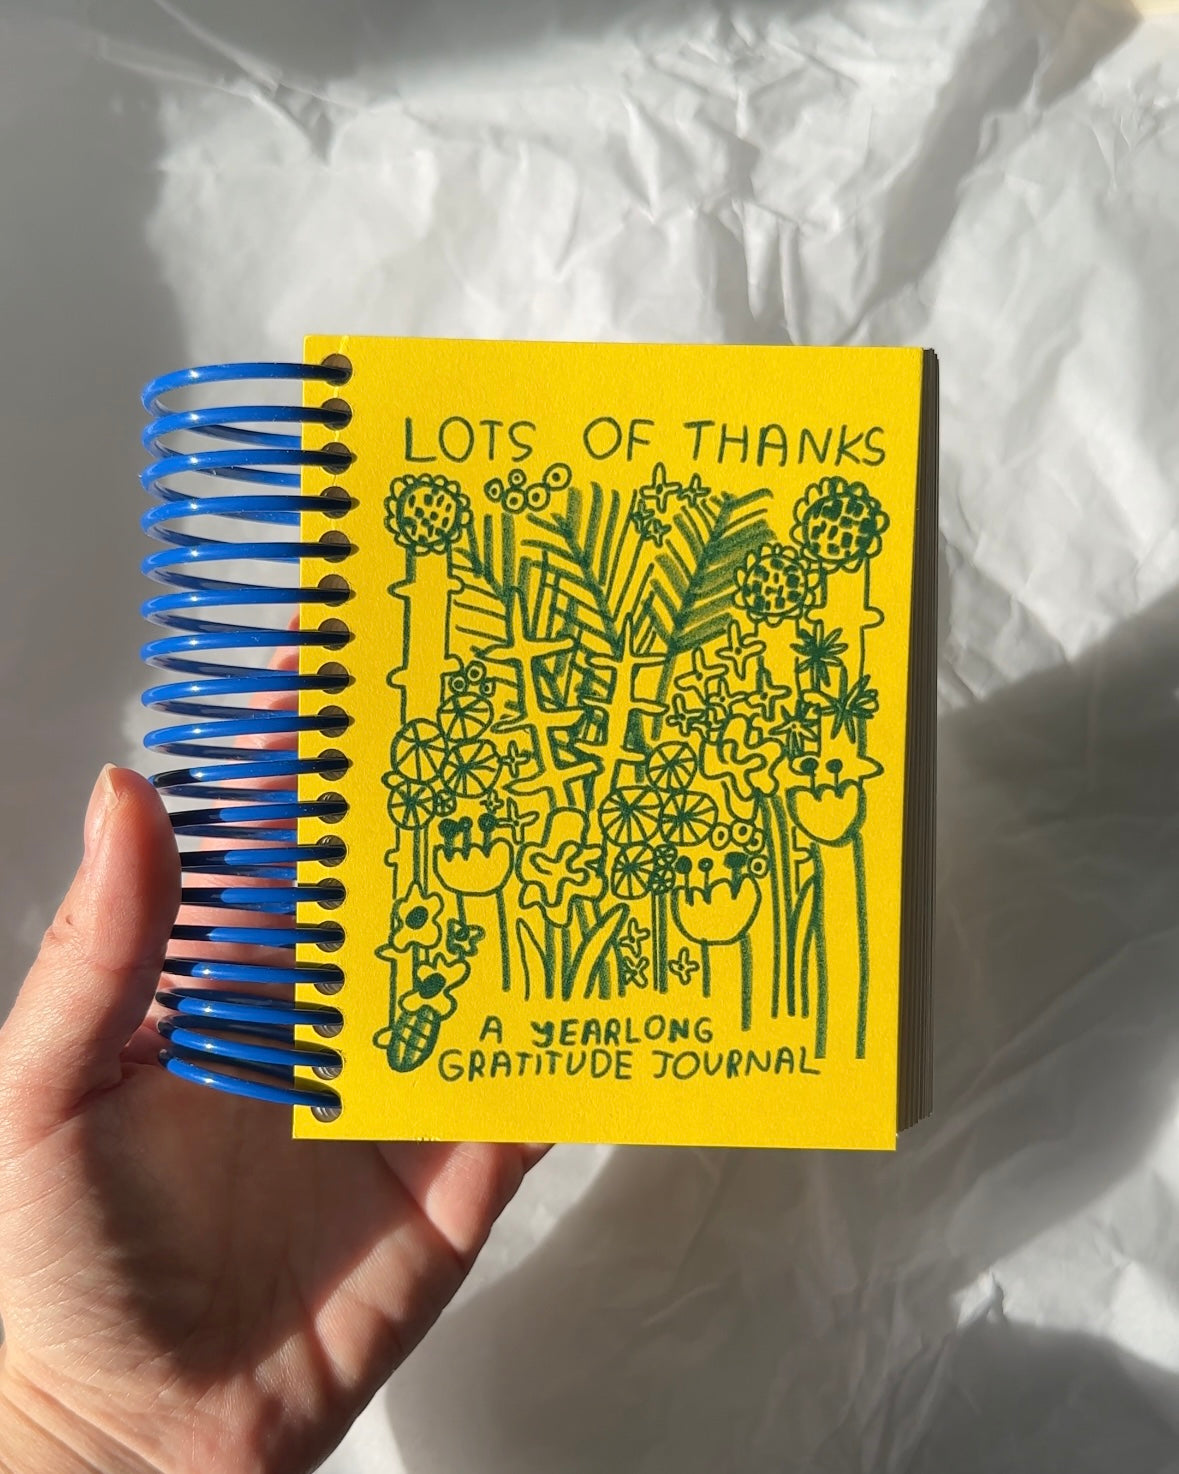 Lots of Thanks - A Yearlong Gratitude Compact Journal